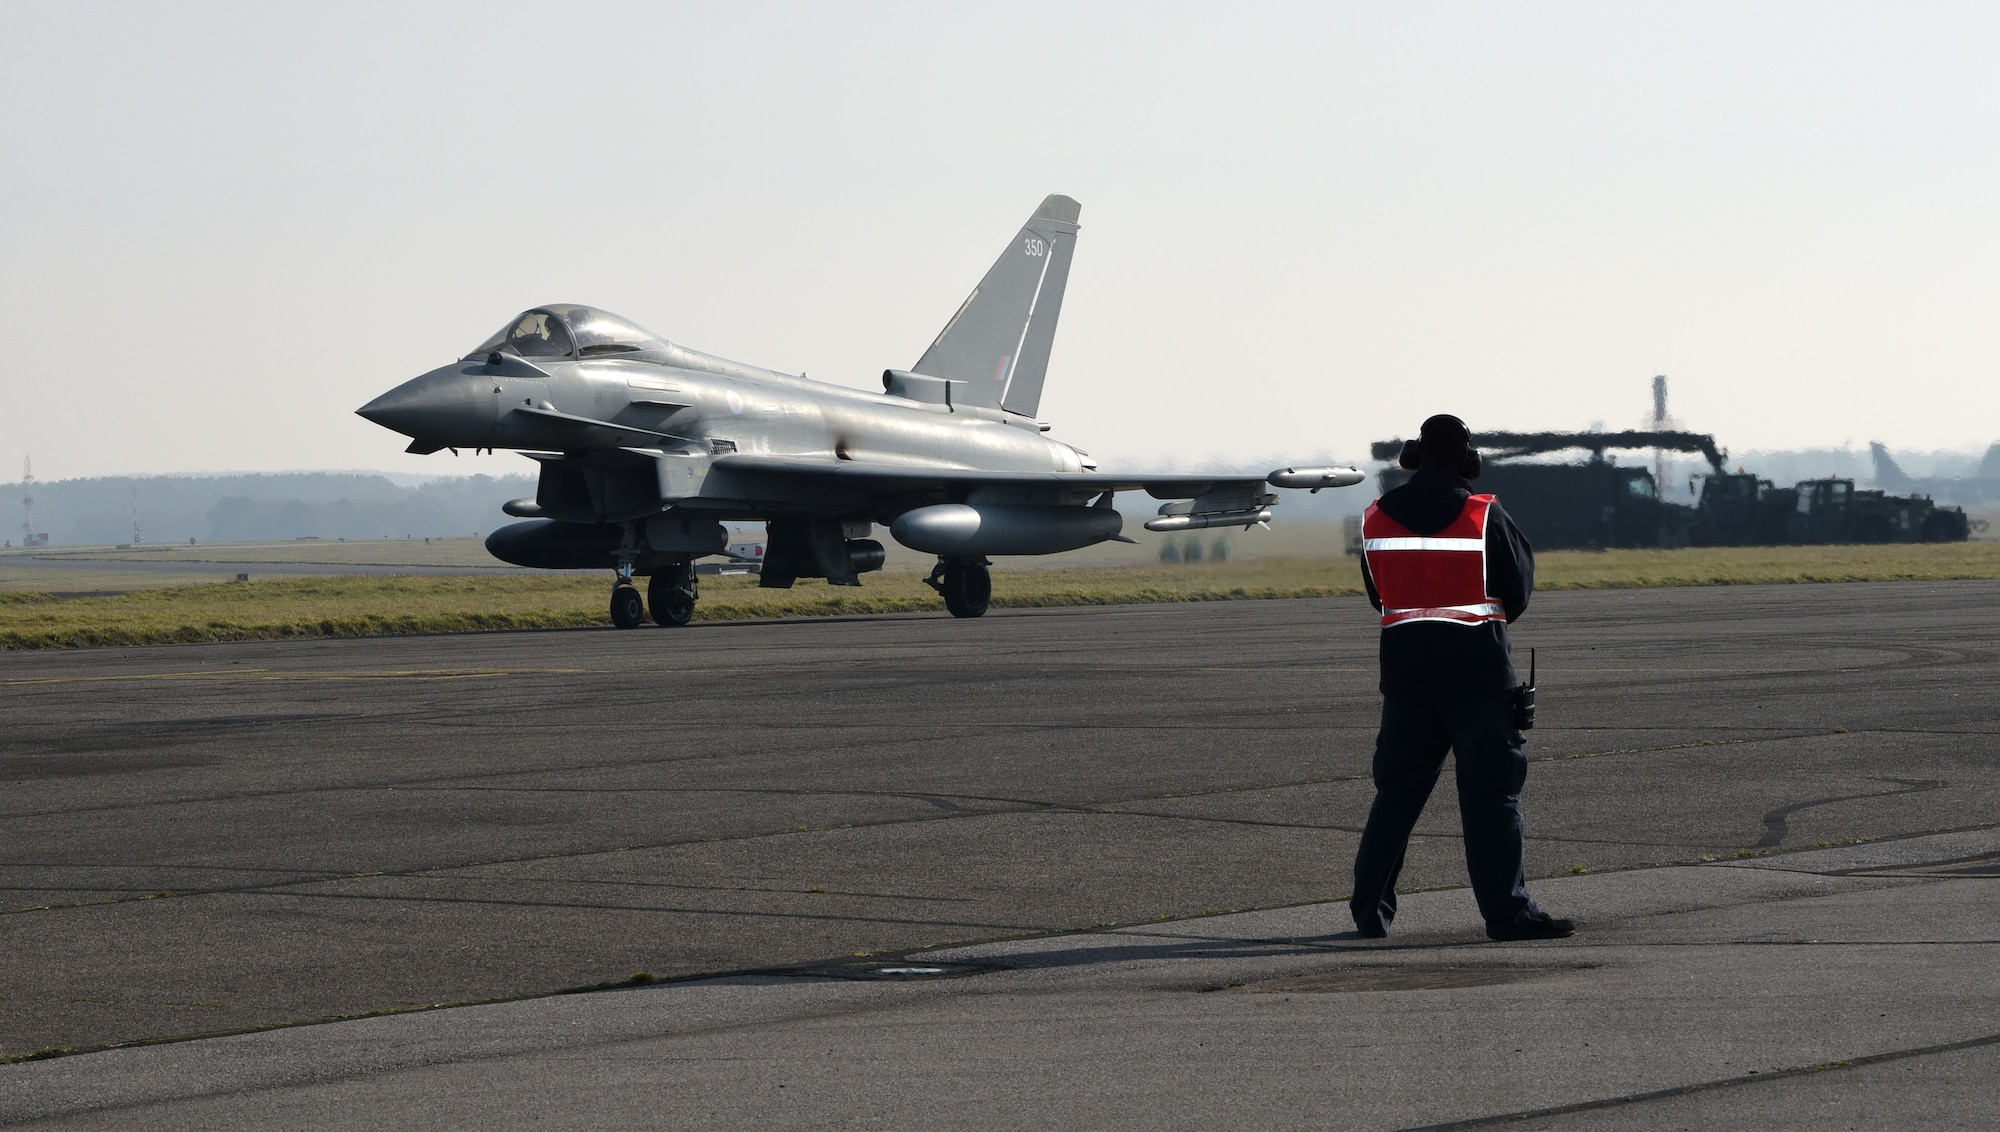 A Eurofighter Typhoon FGR4 taxis from a hardstand as it prepares to take off after being marshalled out by a Team Mildenhall member from transient alert at Royal Air Force Mildenhall, England, Feb. 15, 2023. The aircraft, from RAF Coningsby, England, diverted here due to bad weather. The Typhoon is a highly capable and extremely agile multi-role combat aircraft, and the pilot performs many essential functions through the aircraft’s hands on throttle and stick interface which, combined with an advanced cockpit and the helmet equipment assembly, renders the Typhoon superbly equipped for all aspects of air operations. (U.S. Air Force photo by Karen Abeyasekere)